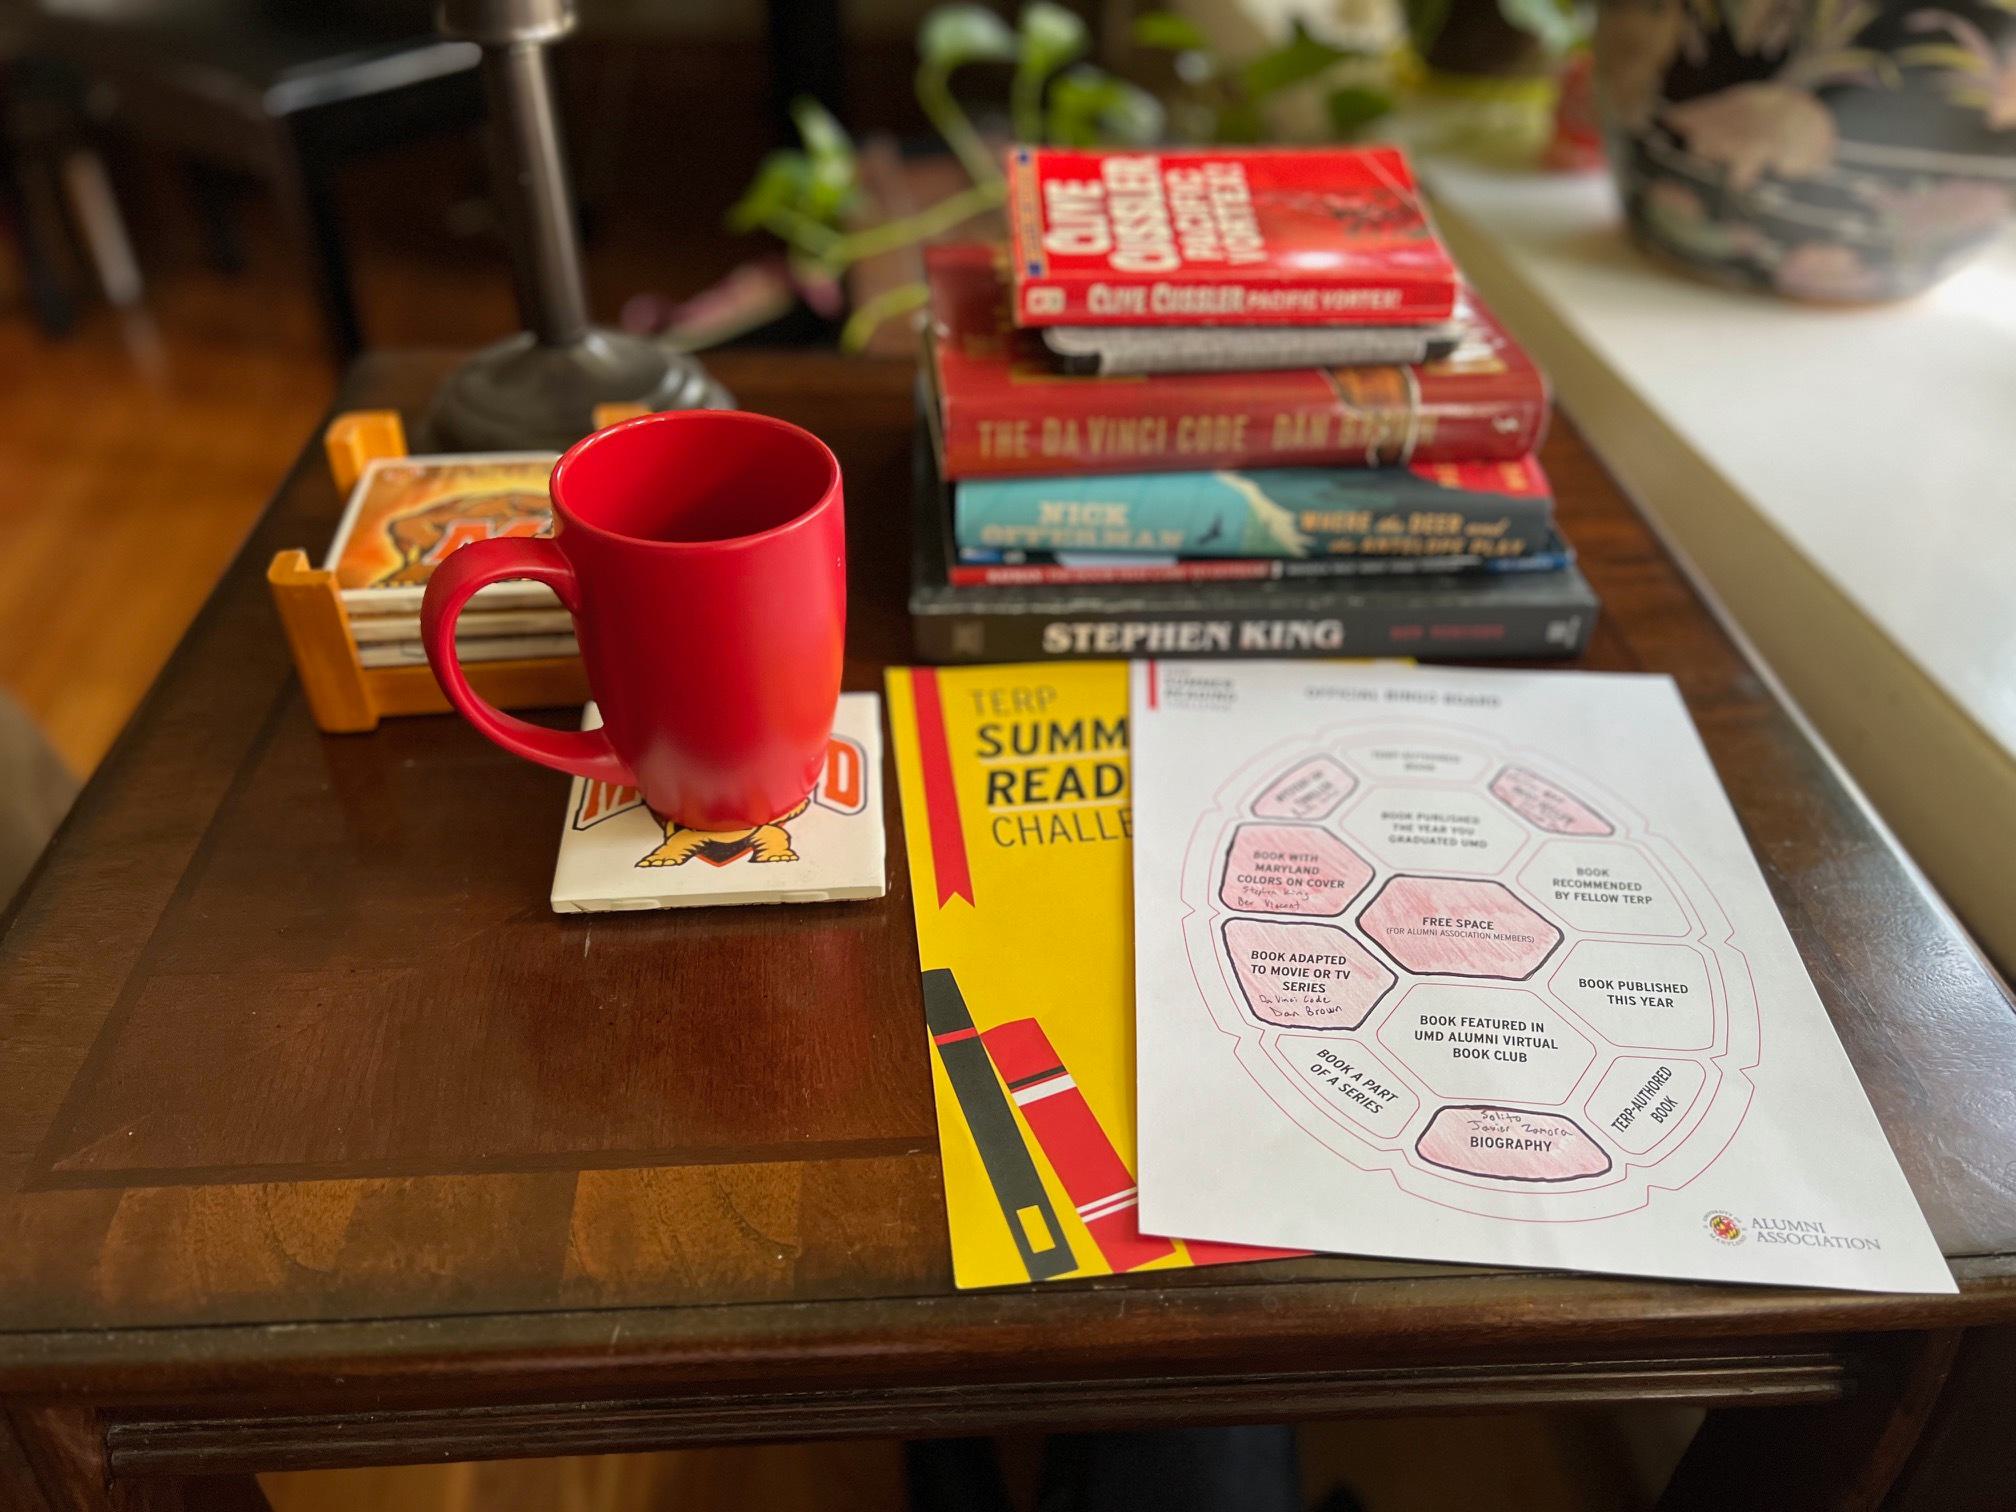 Summer Reading Challenge materials and books on a coffee table